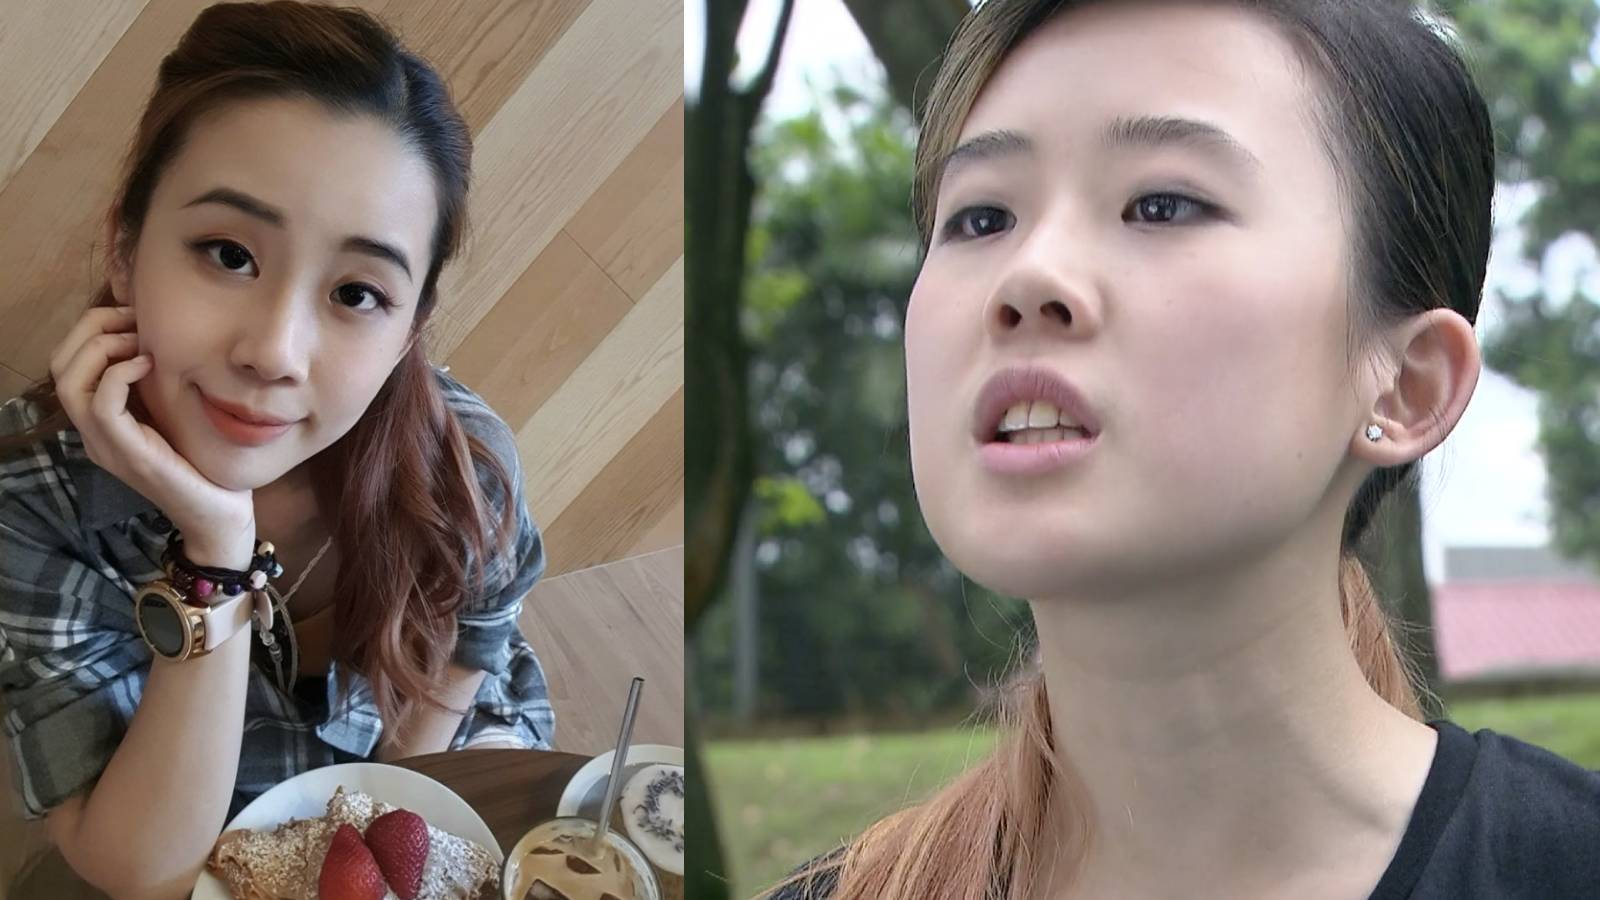 Mediacorp Actress Jernelle Oh Says She Channeled Her Inner Ah Lian For Viral 2013 Crimewatch Clip